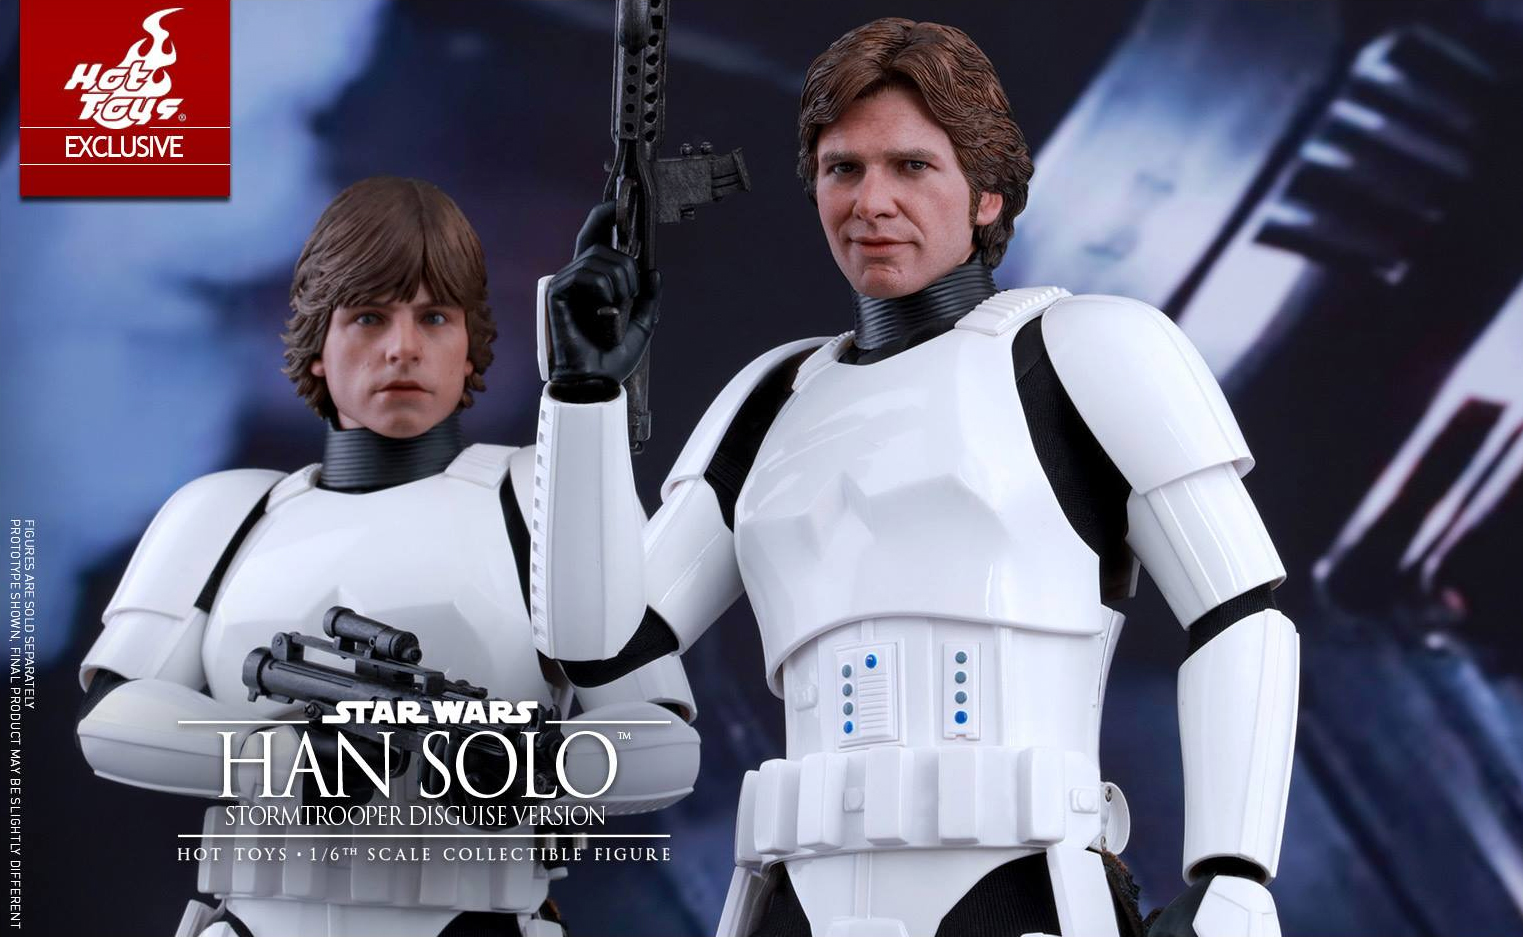 A Figure With Han Solo’s Best Smirk, And Other Cool Toys Of The Week